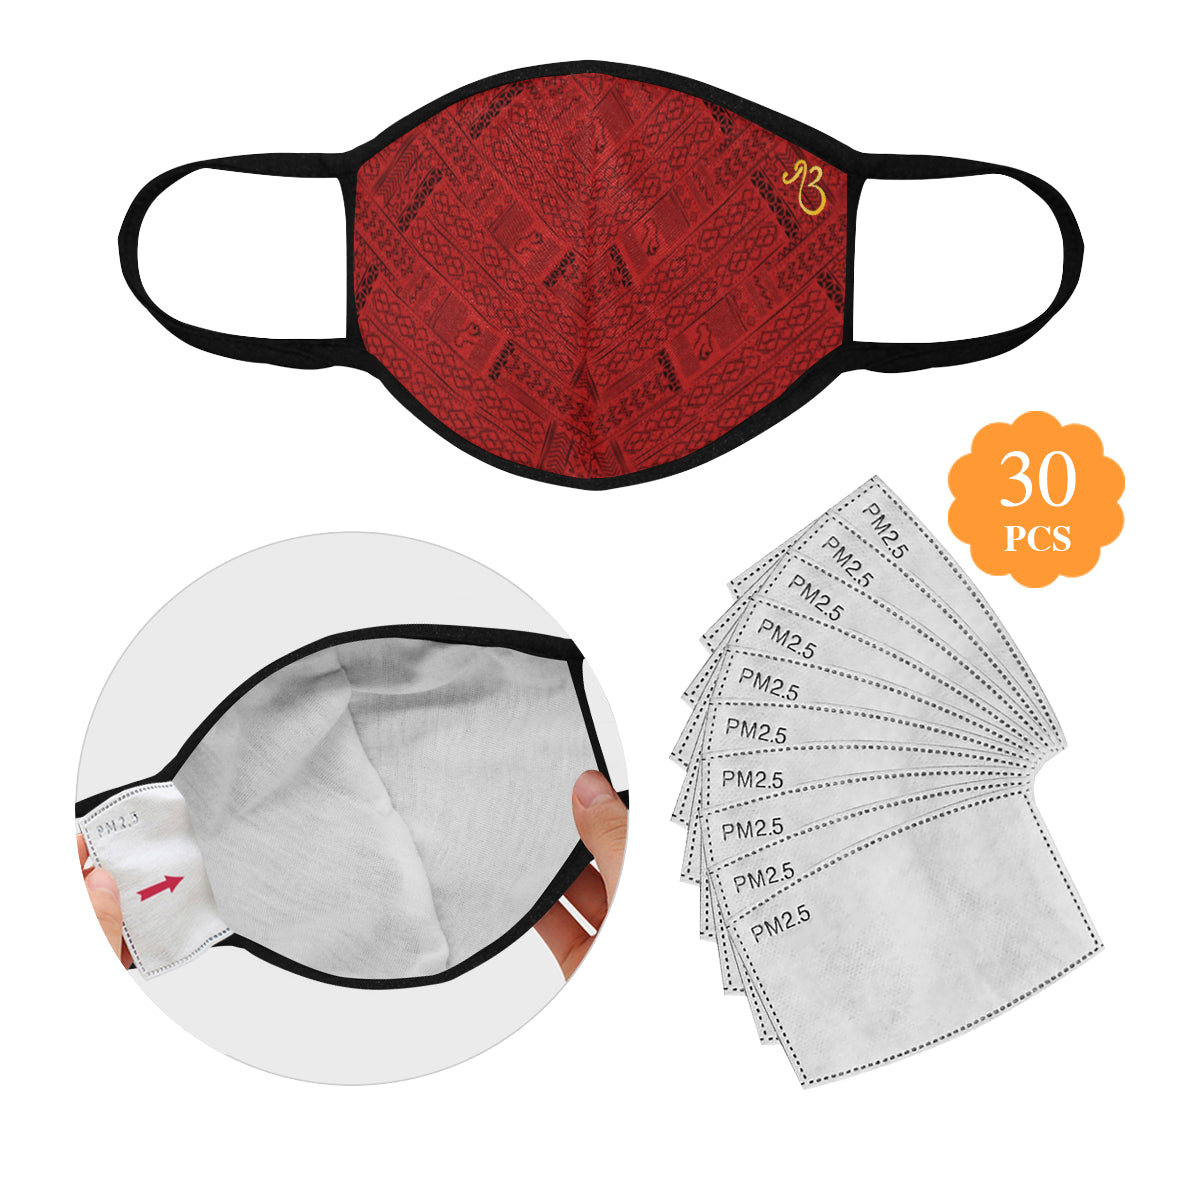 Tribal Print Cotton Fabric Face Mask with filter slot (30 Filters Included) - Non-medical use